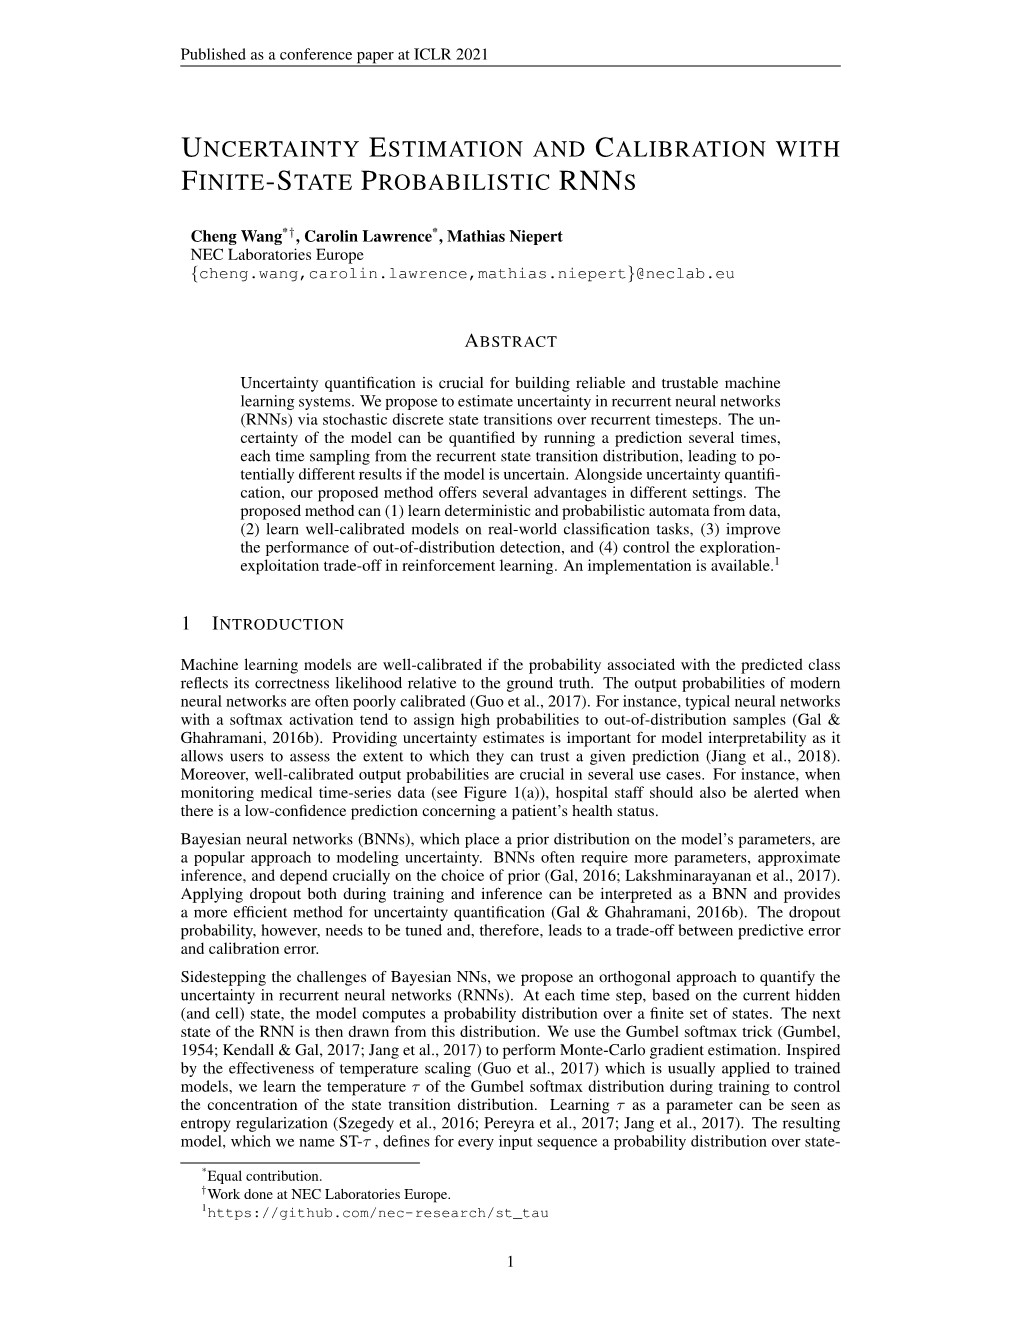 Uncertainty Estimation and Calibration with Finite-State Probabilistic Rnns